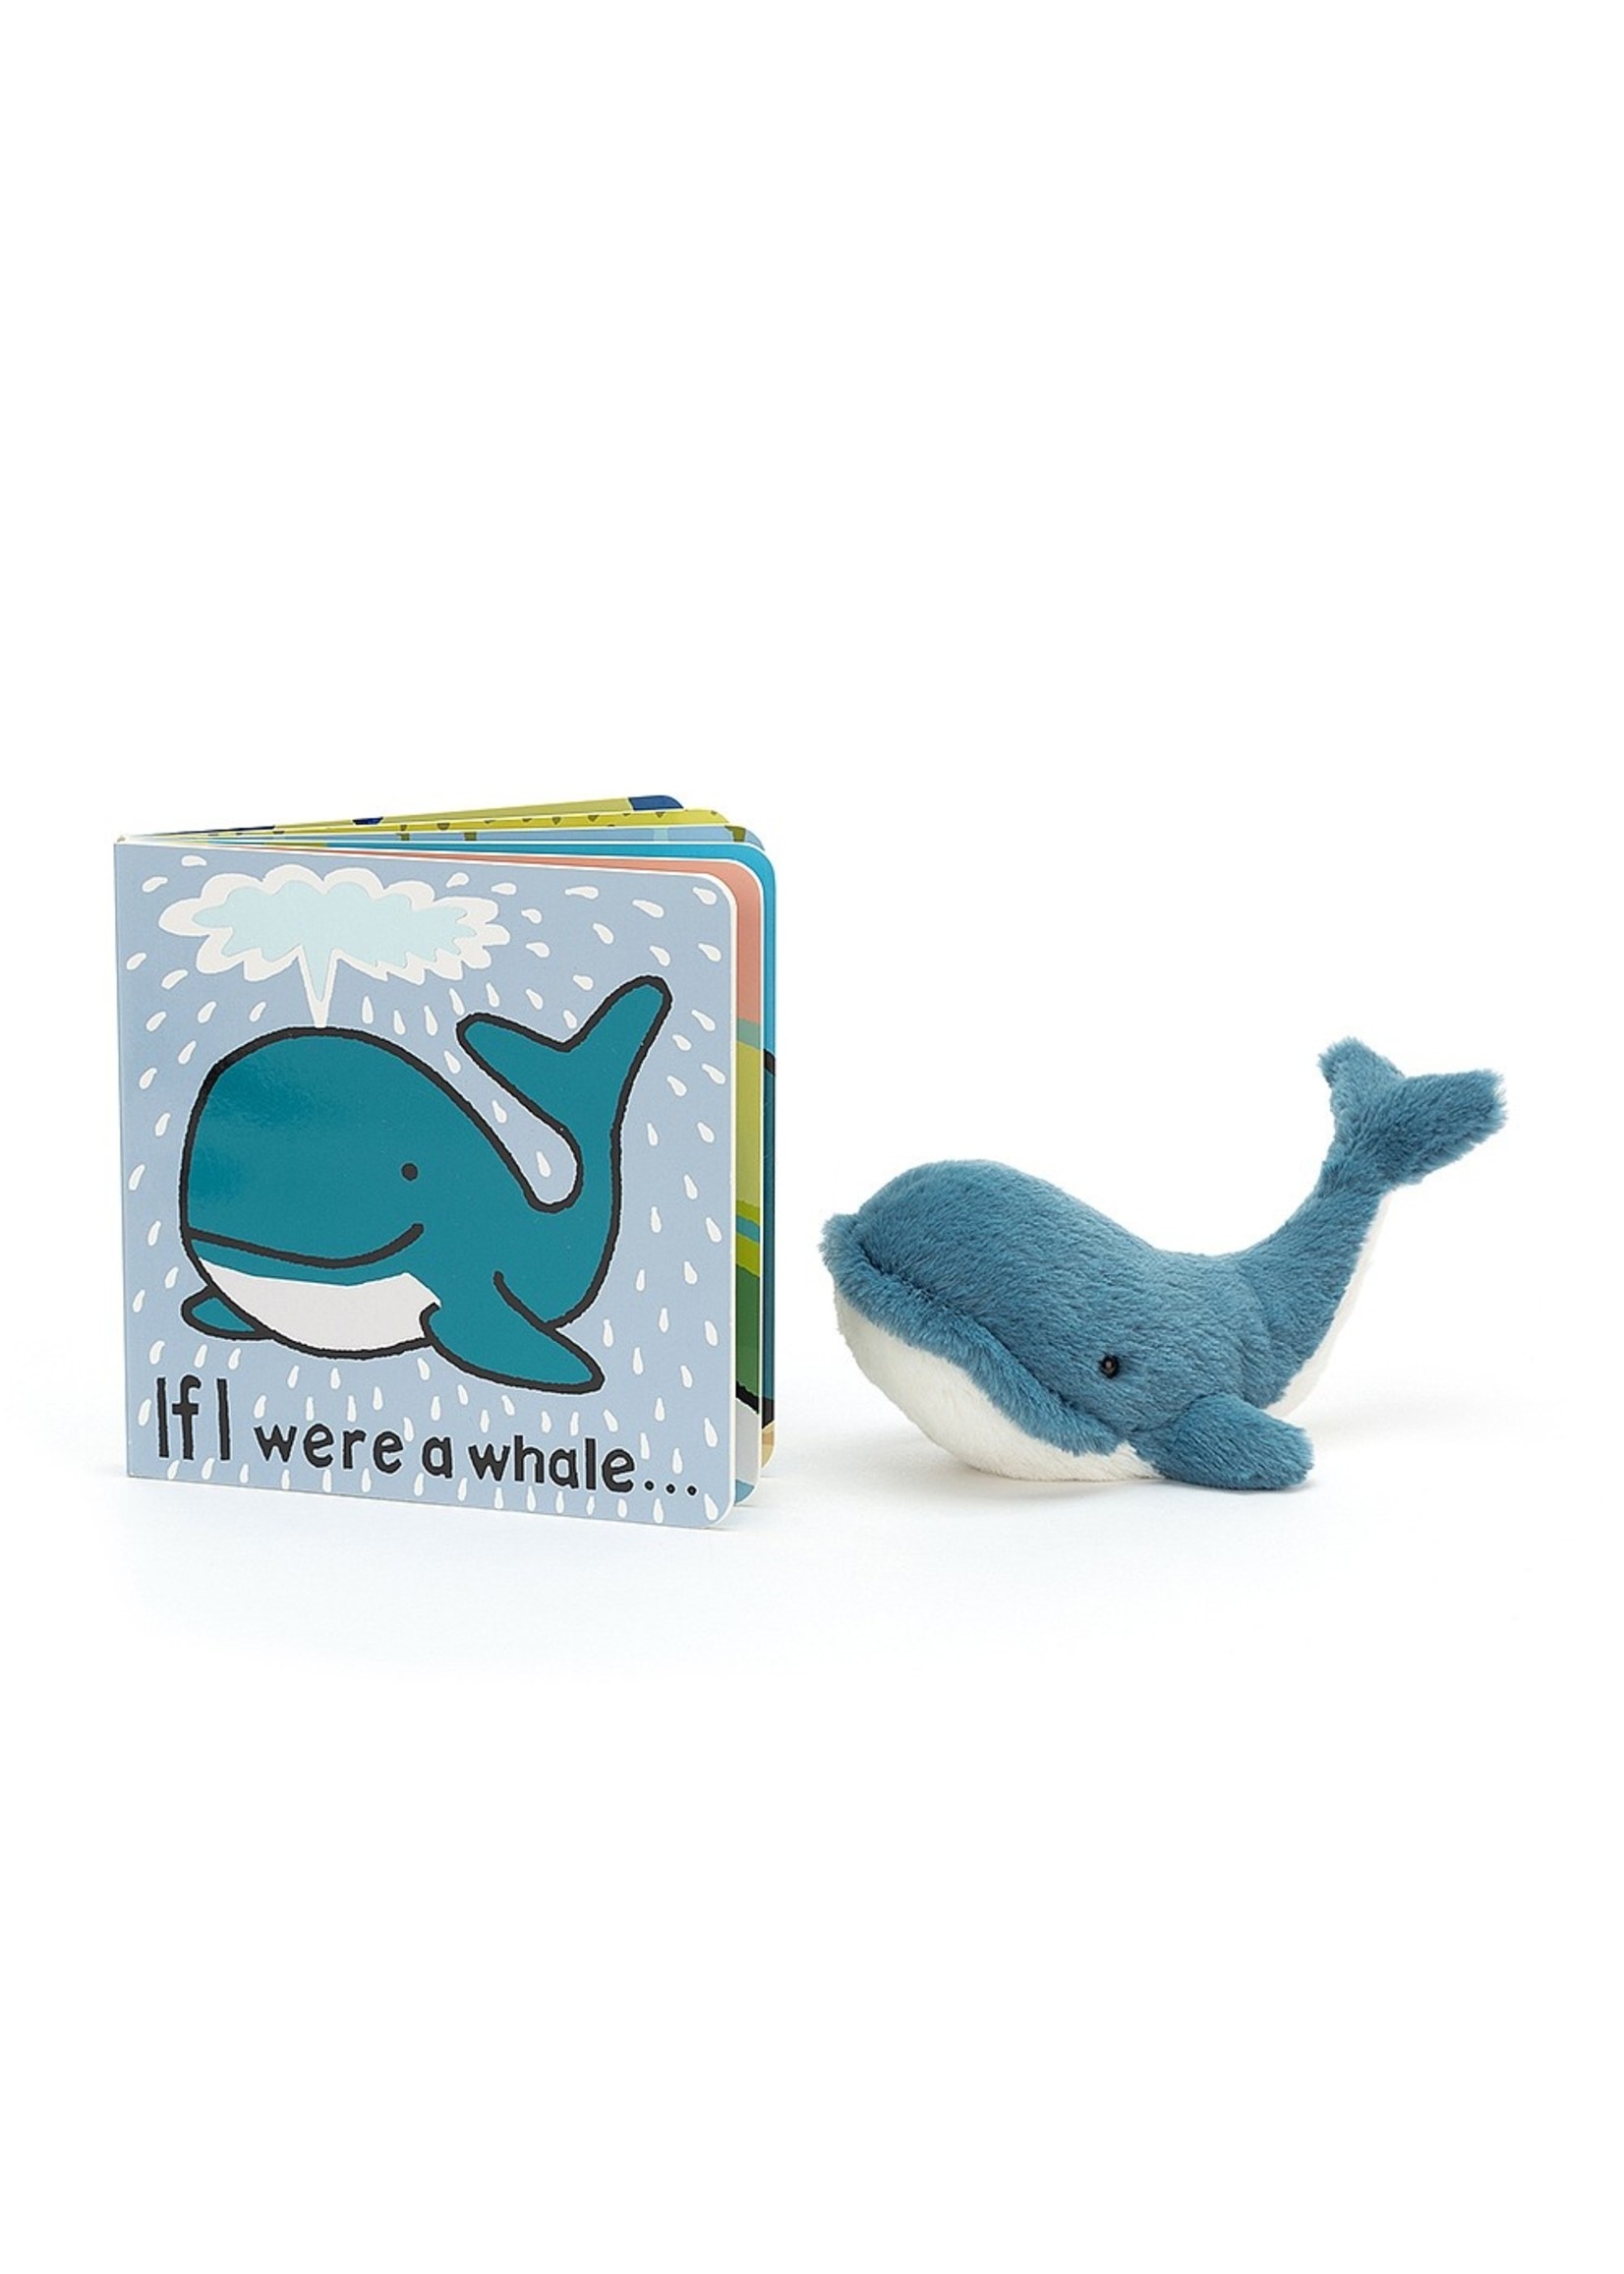 Jellycat Jellycat "If I Were a Whale" Book